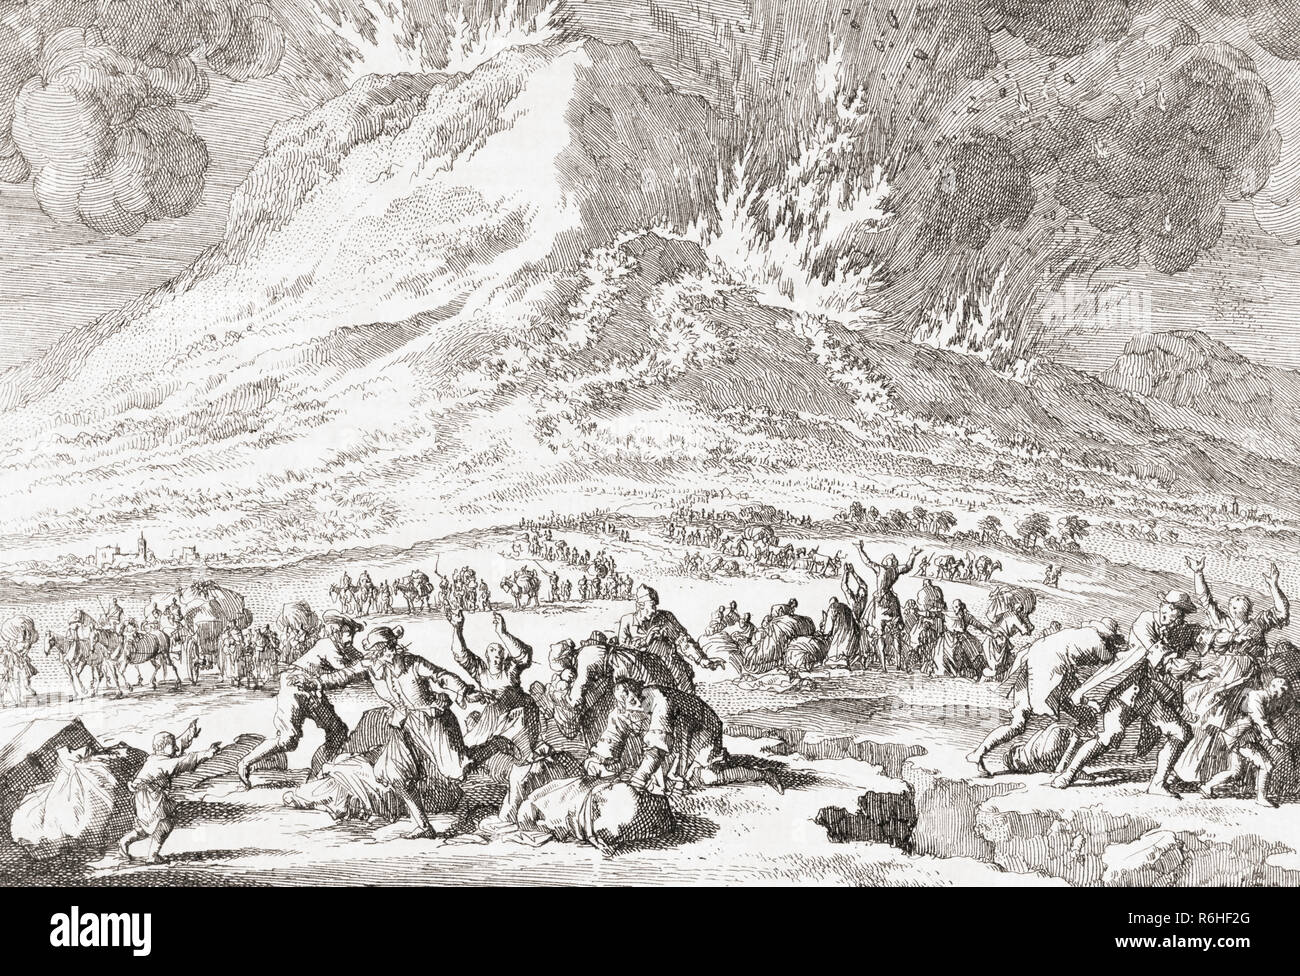 Eruption of Mt. Etna volcano in Sicily, Italy, in 1669.  After a 17th century engraving. Stock Photo